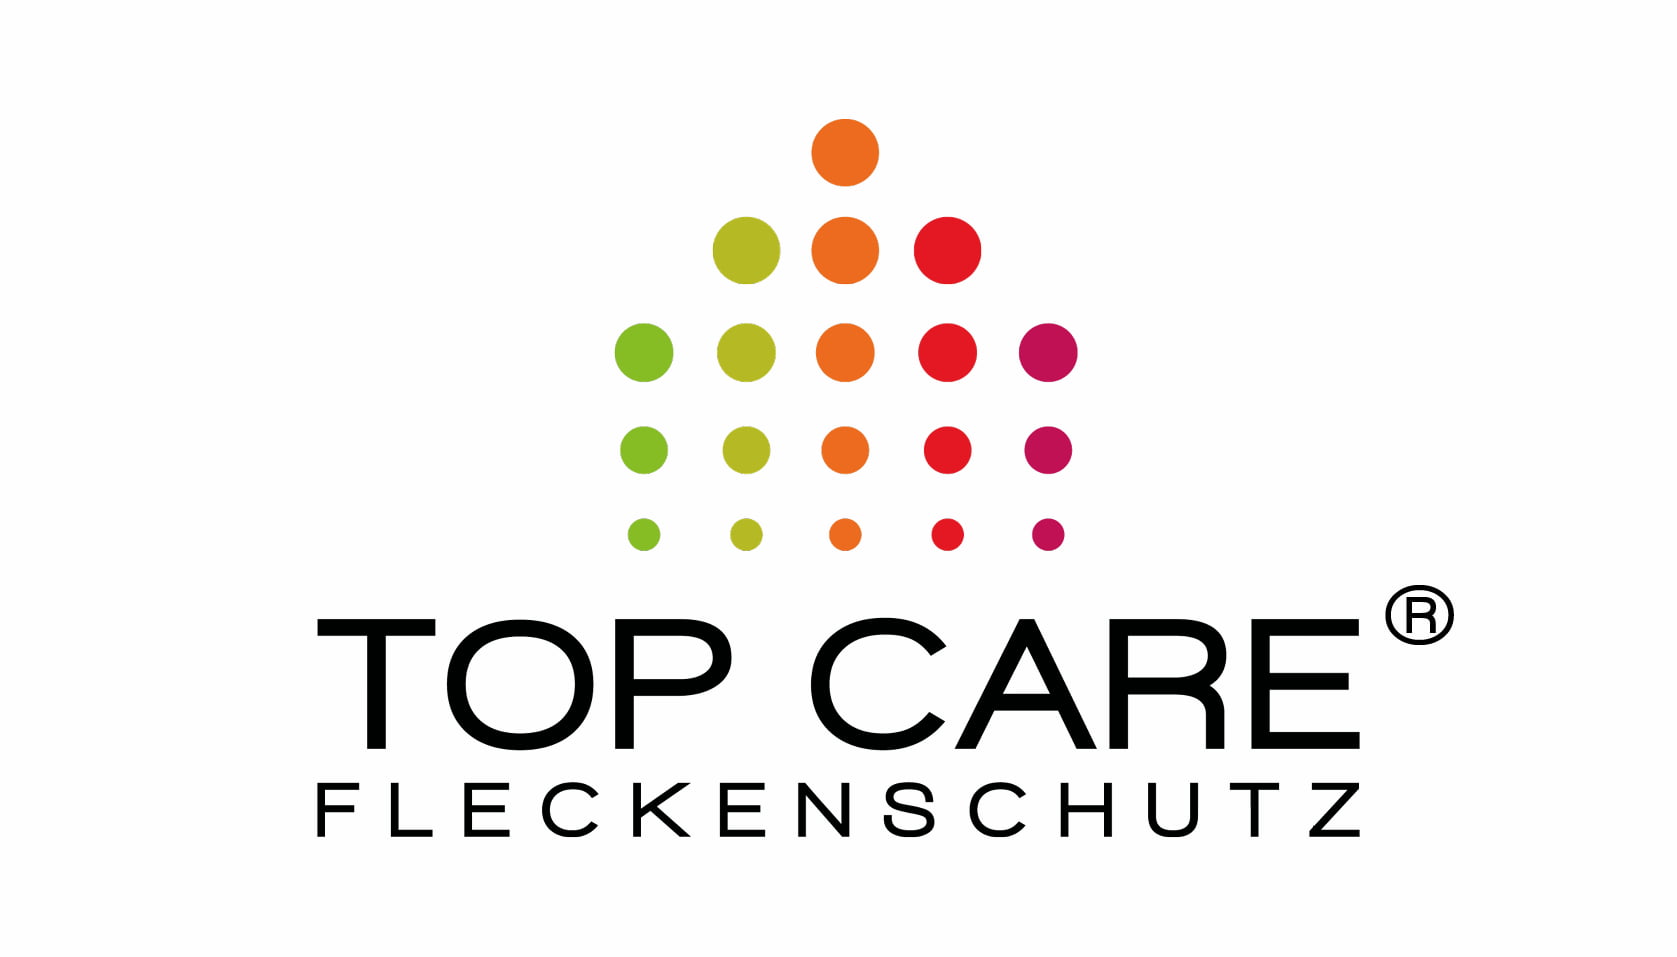 (c) Top-care.ch